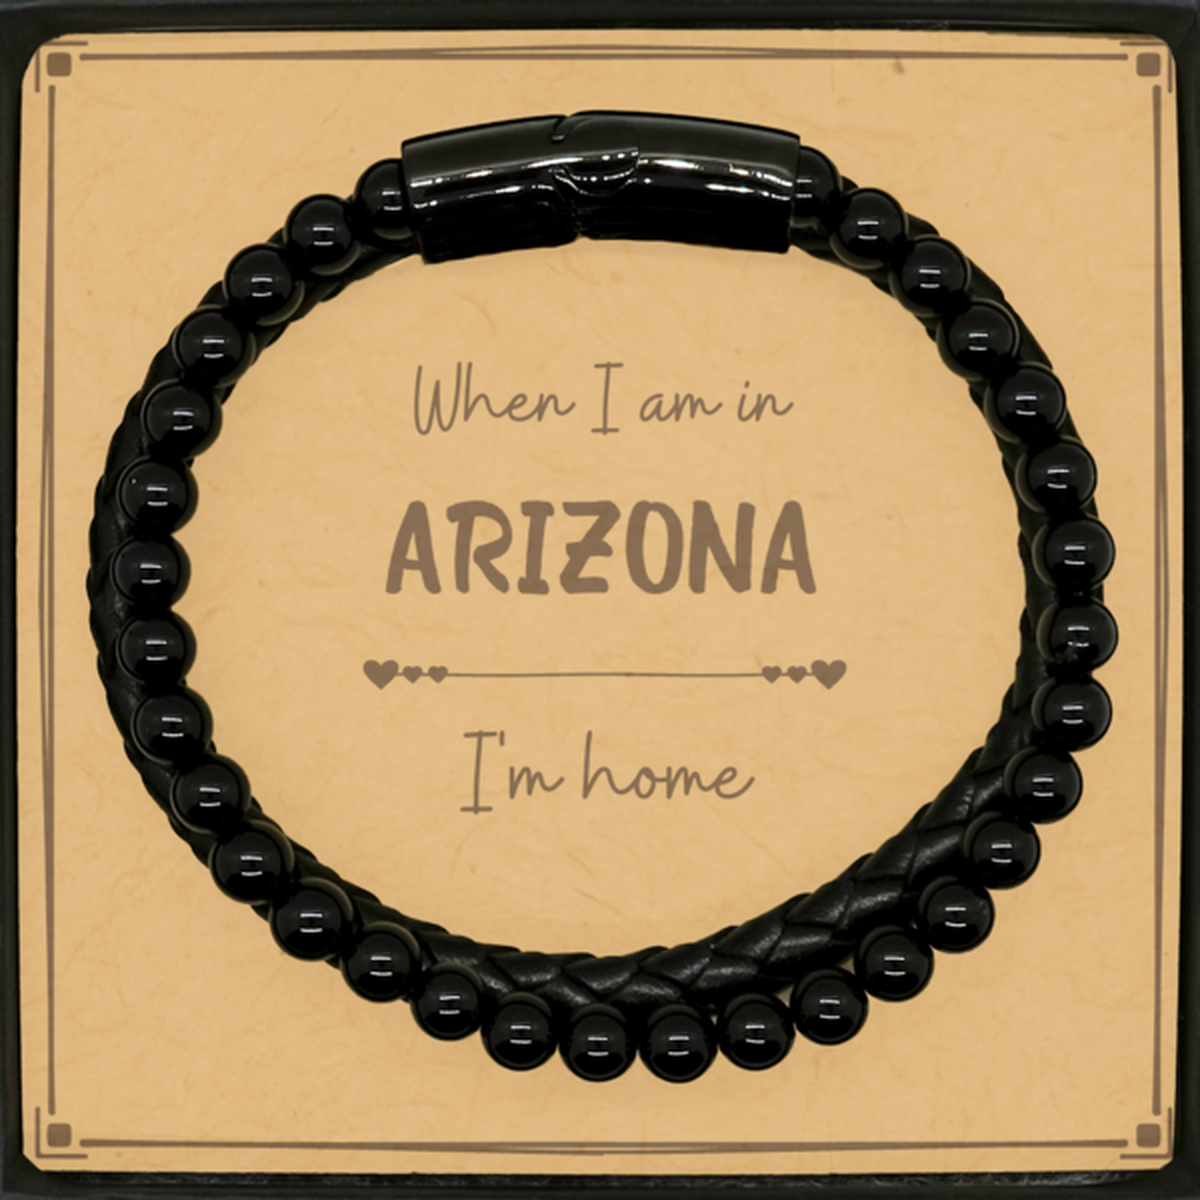 When I am in Arizona I'm home Stone Leather Bracelets, Message Card Gifts For Arizona, State Arizona Birthday Gifts for Friends Coworker